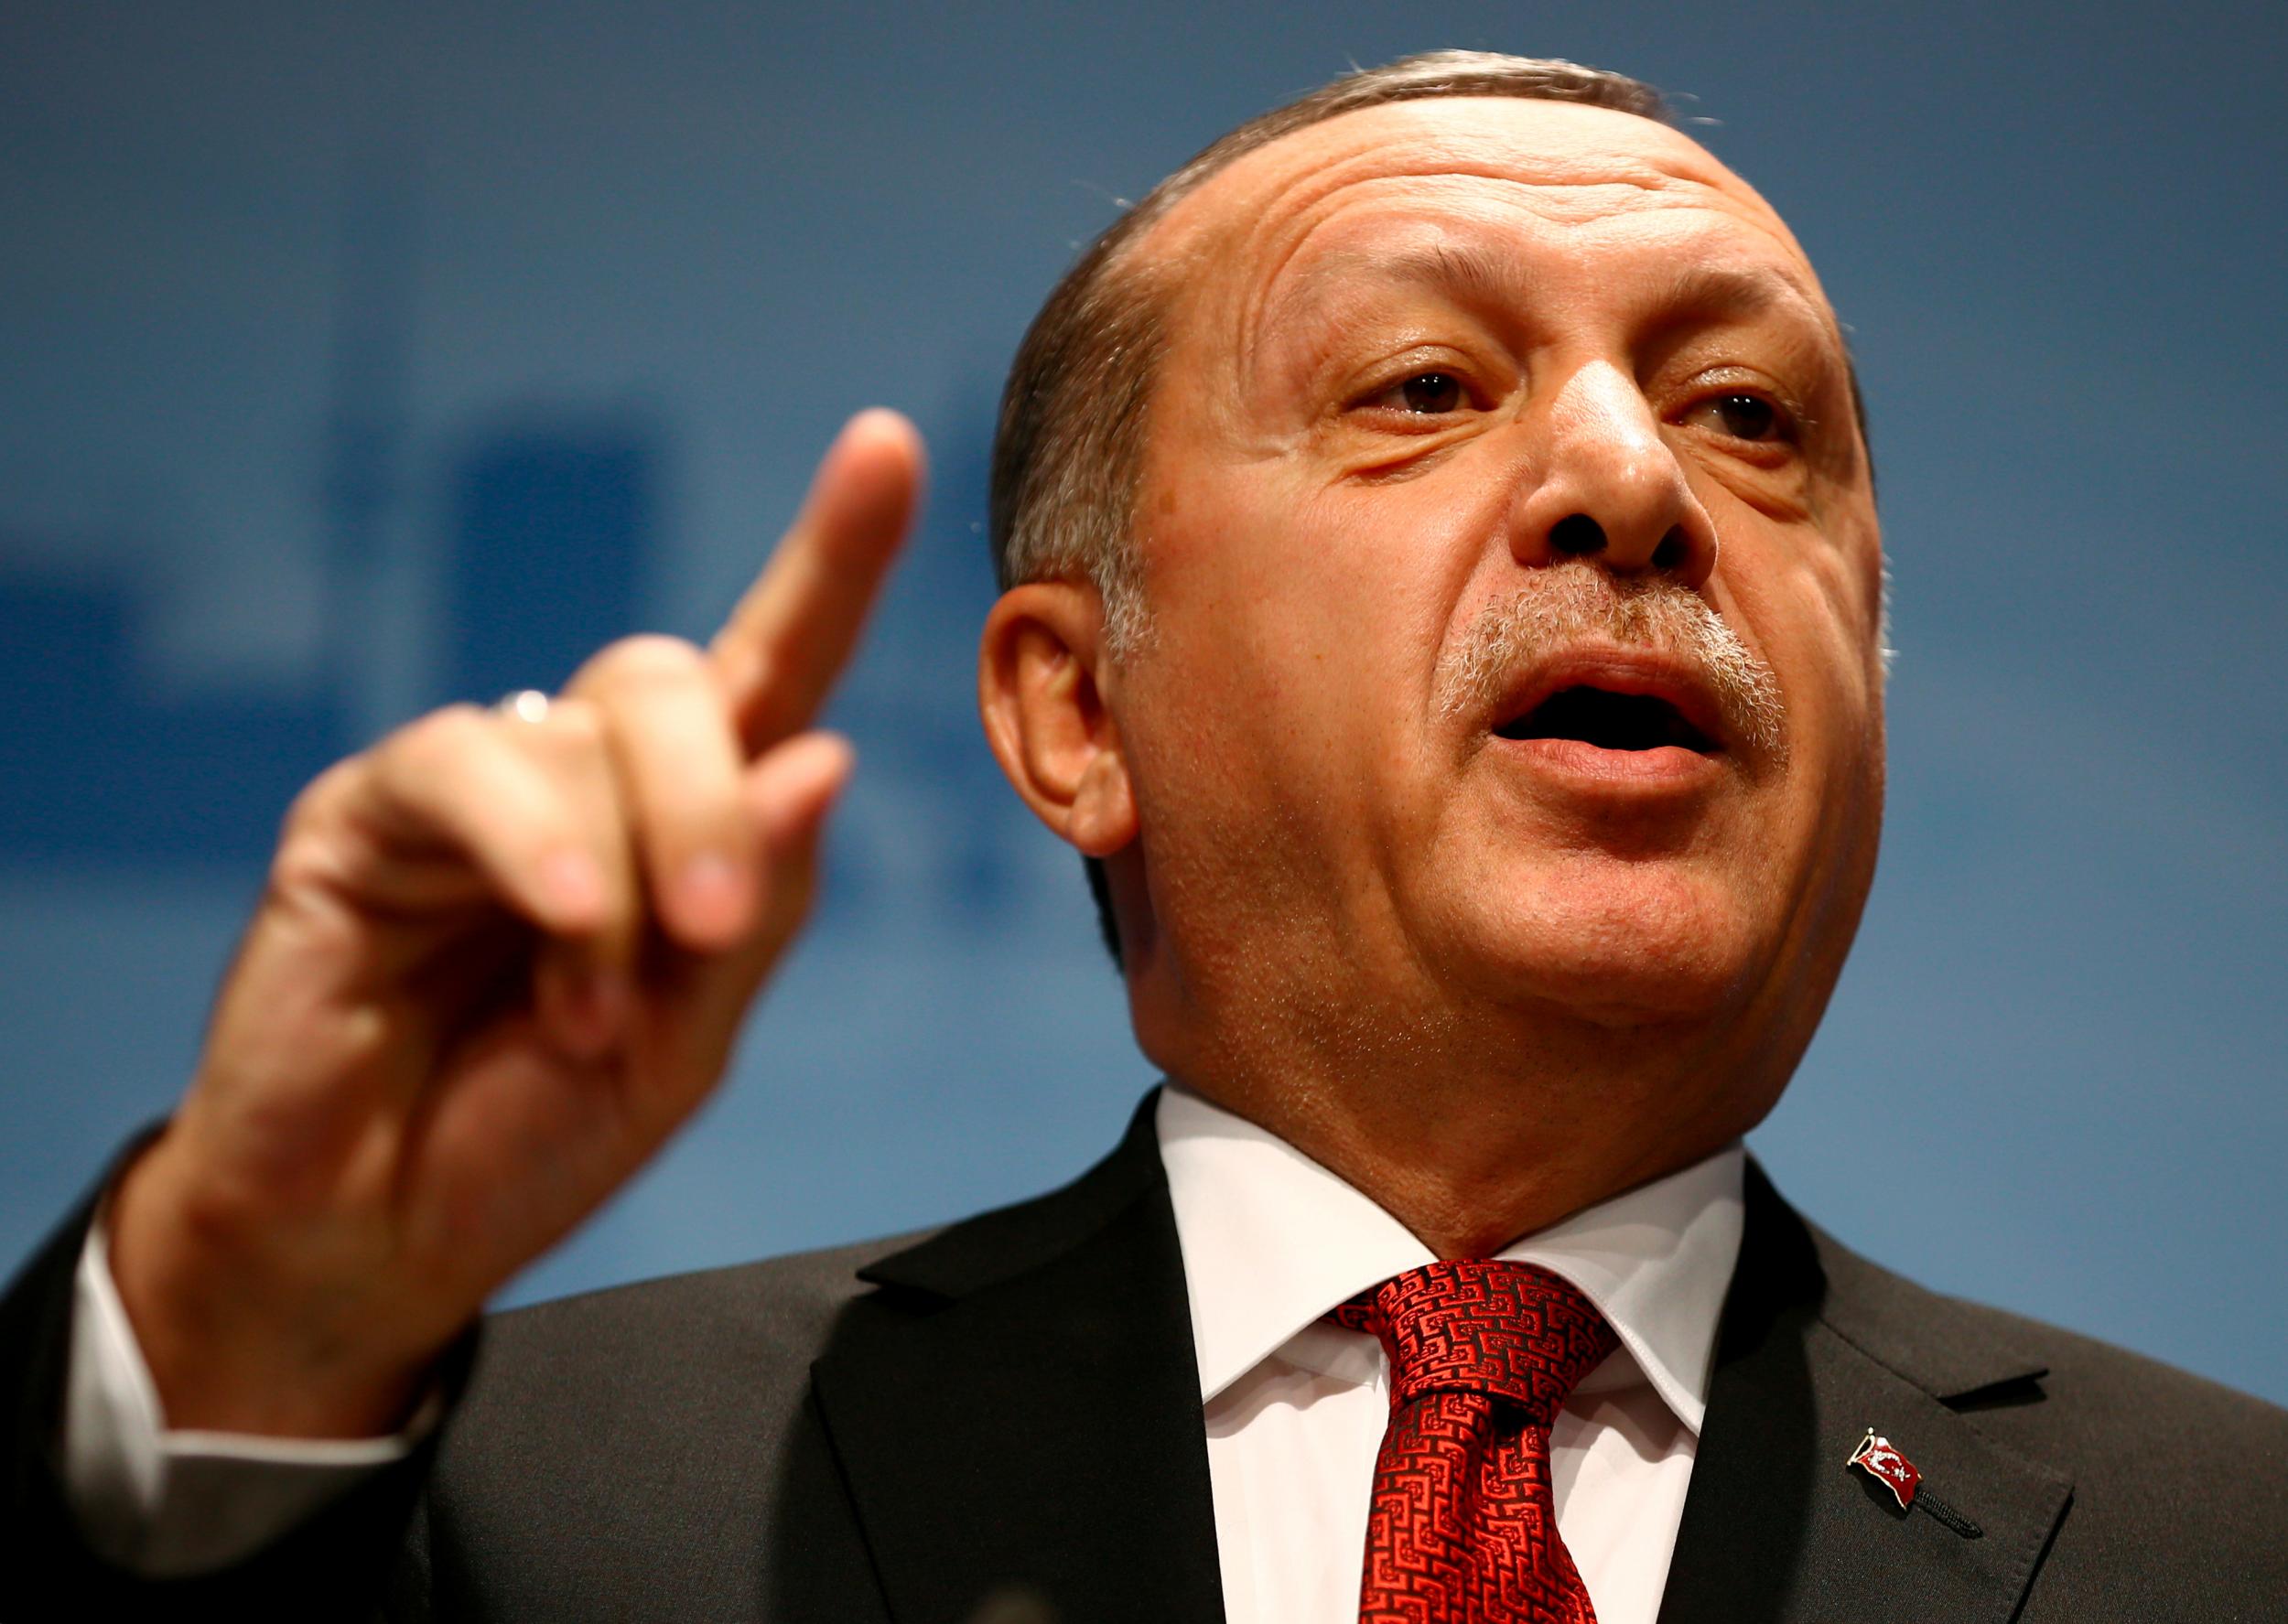 Accession talks have ground to a virtual halt though Turkey remains a candidate for membership